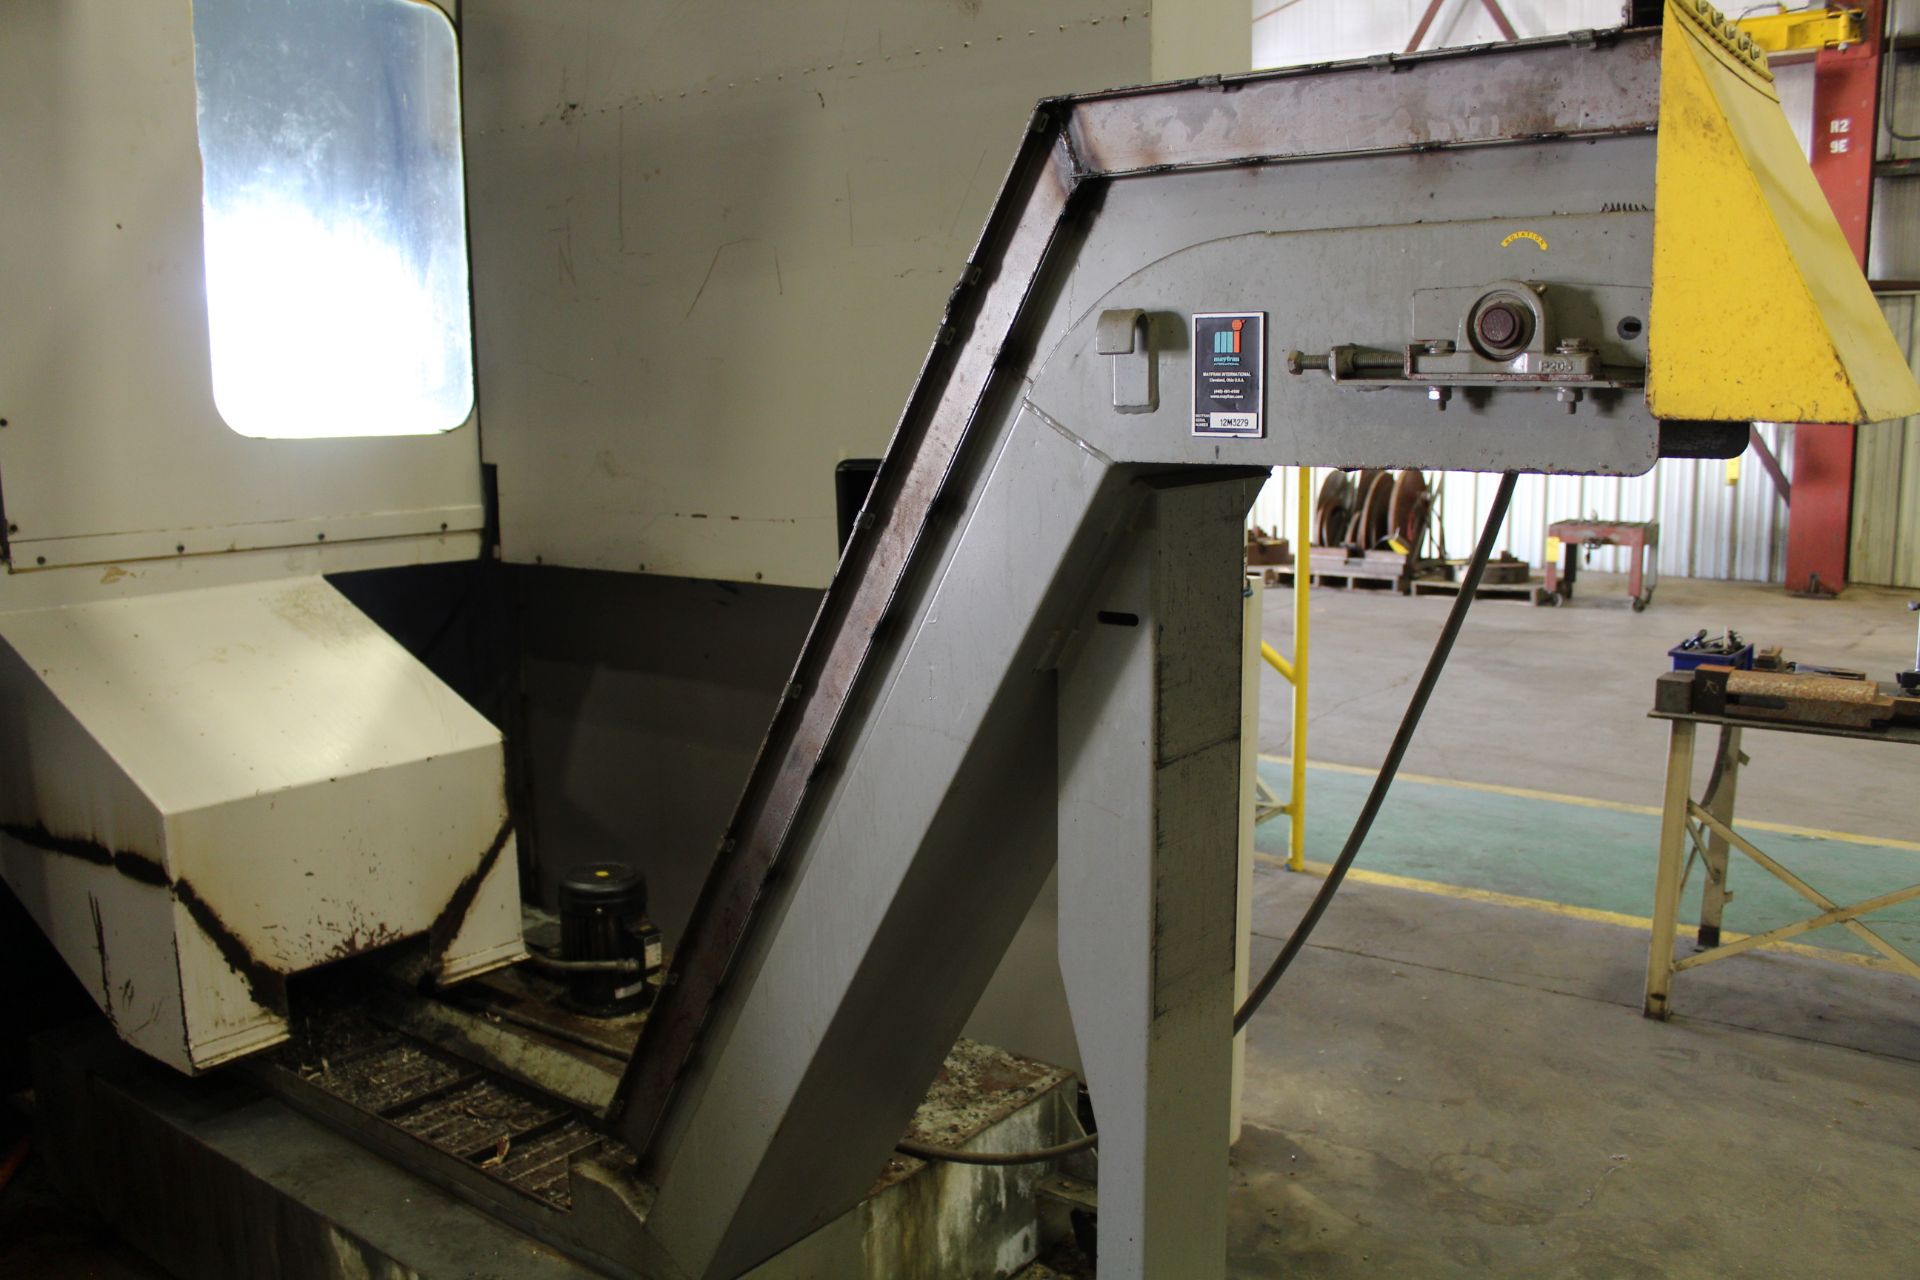 VANGUARD SMTCL GTC200160 CNC VERTICAL BORING MILL, 78" MAX TURNING DIA, 78" MAX TURNING HEIGHT, - Image 4 of 12